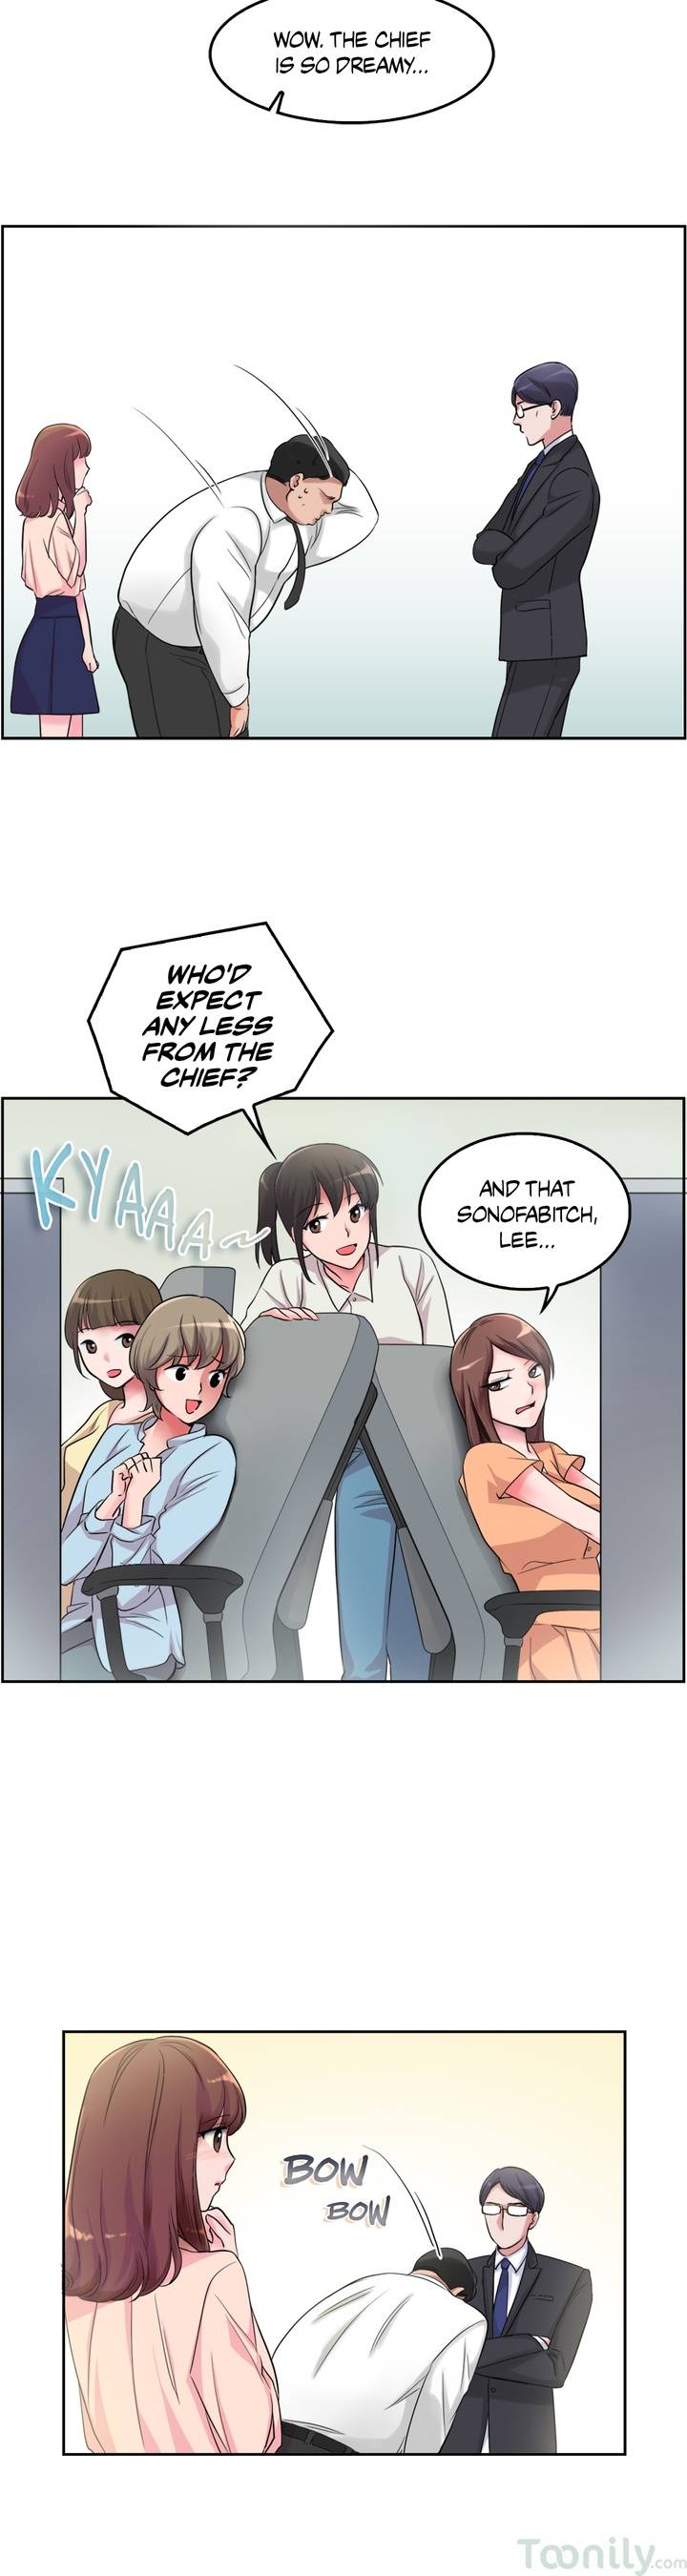 Masters of Masturbation - Chapter 1 Page 8